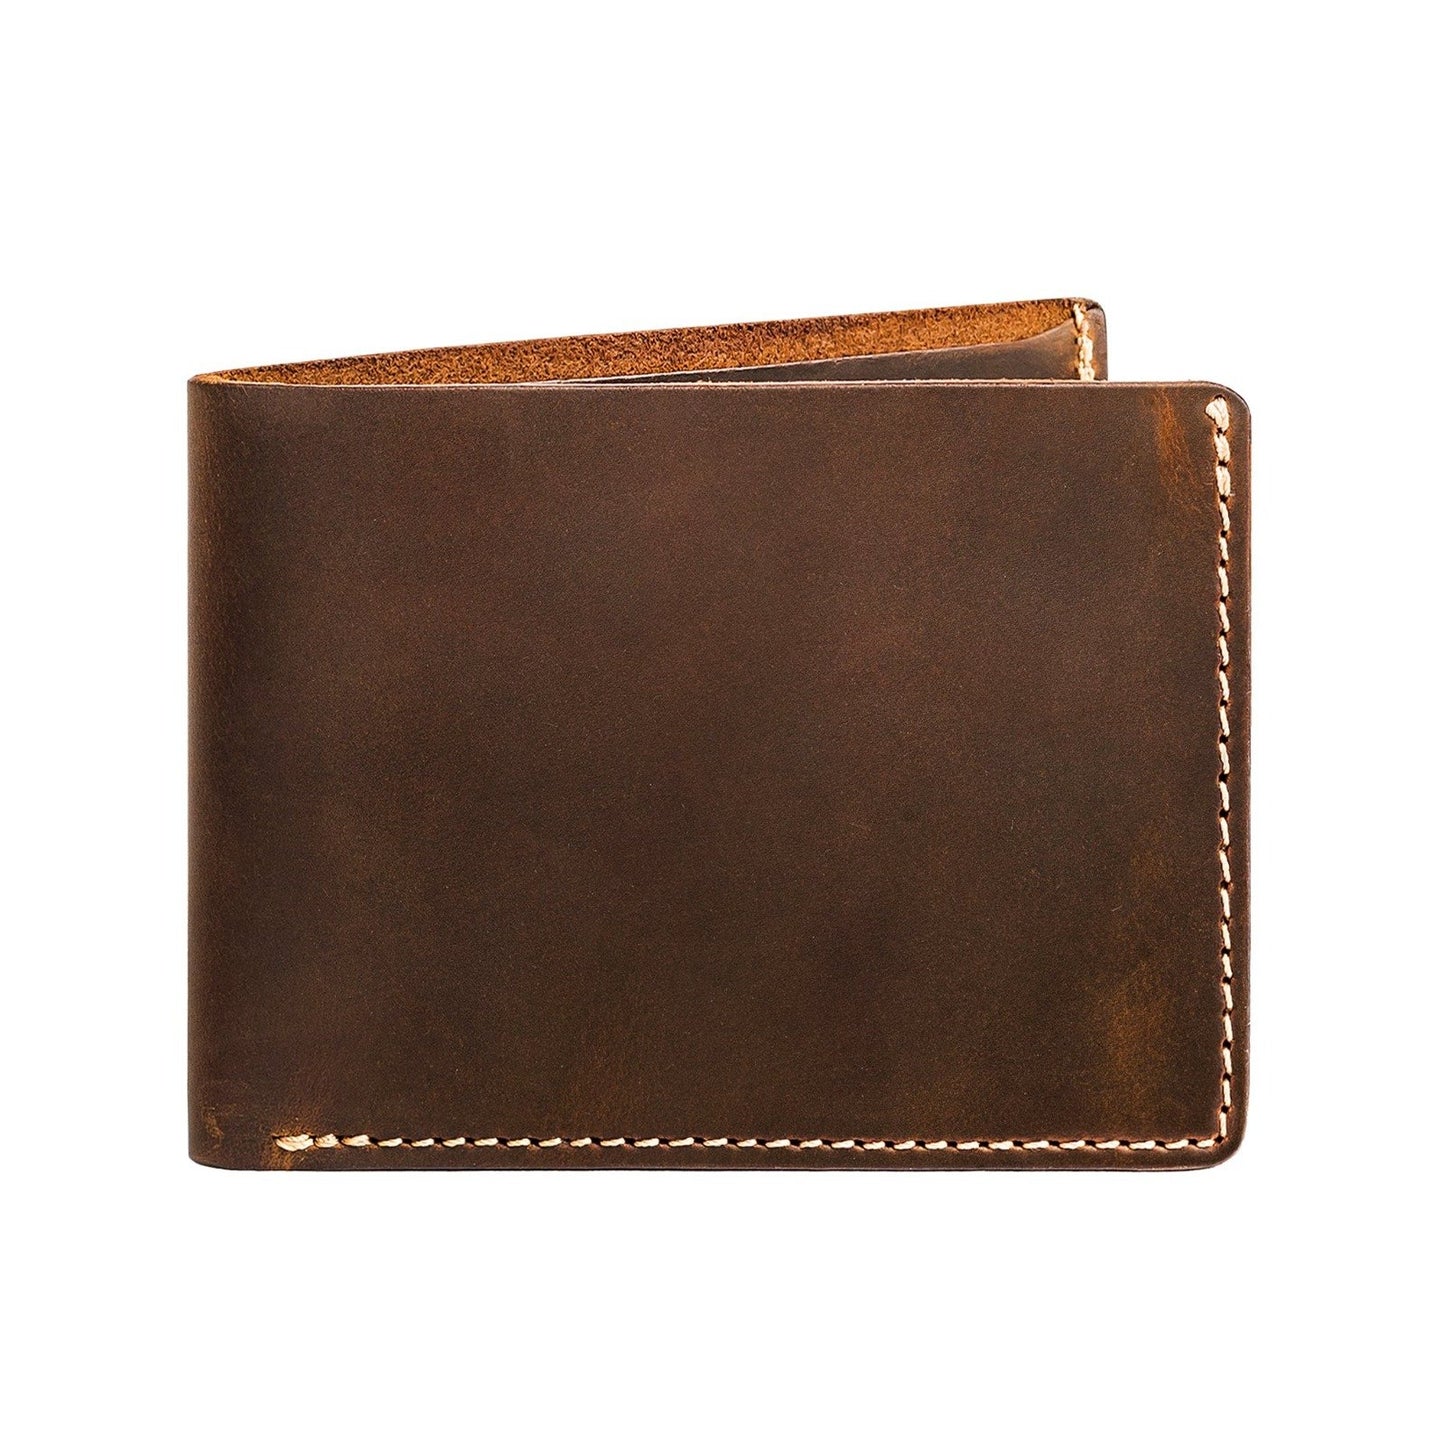 Checked Leather Wallets for Women for sale